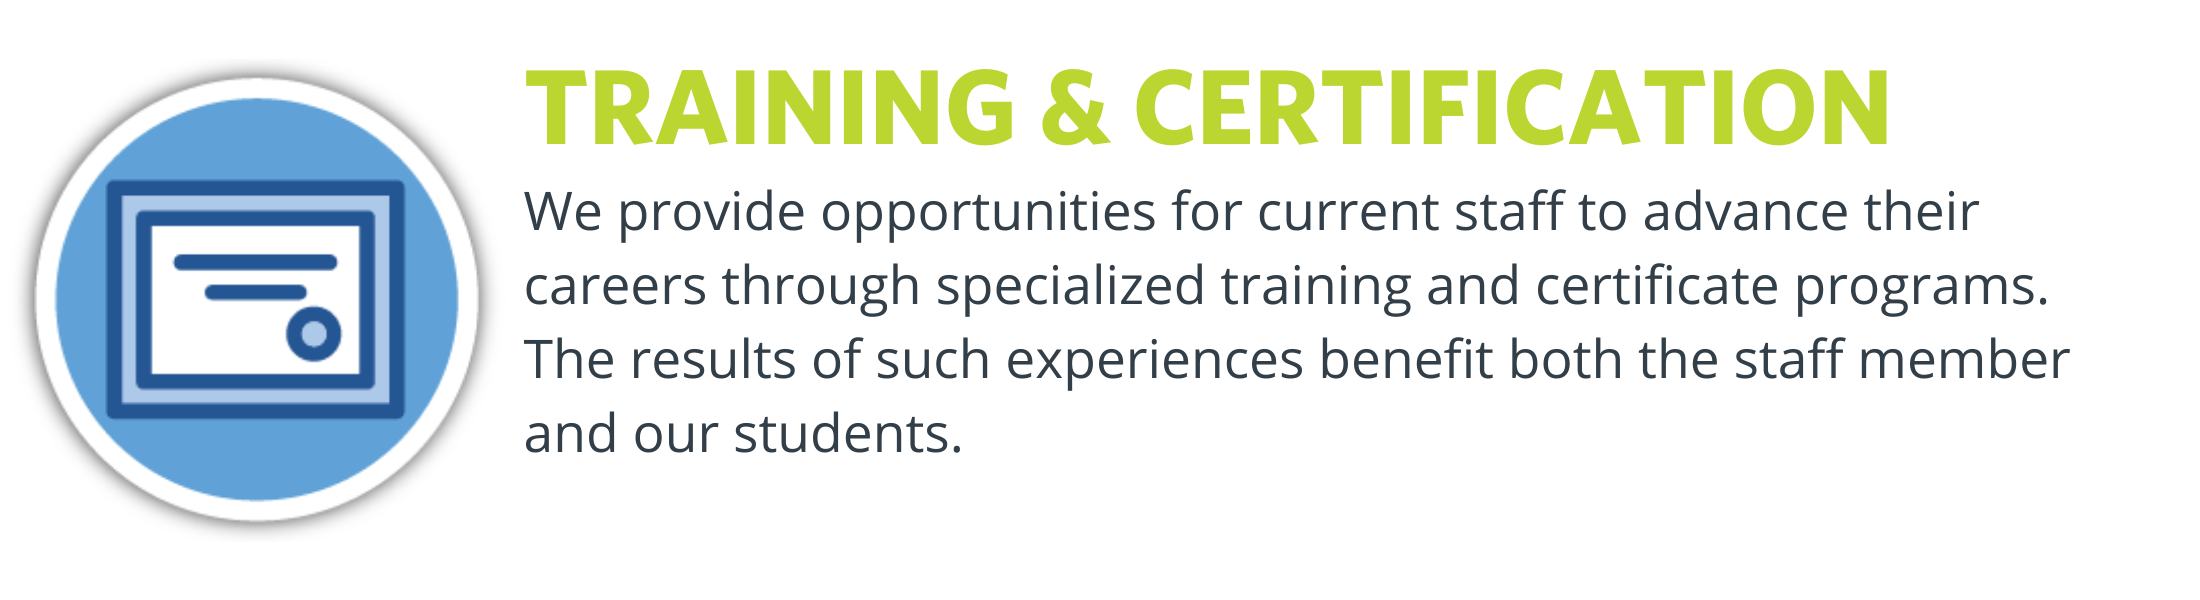 Training & Certification.png